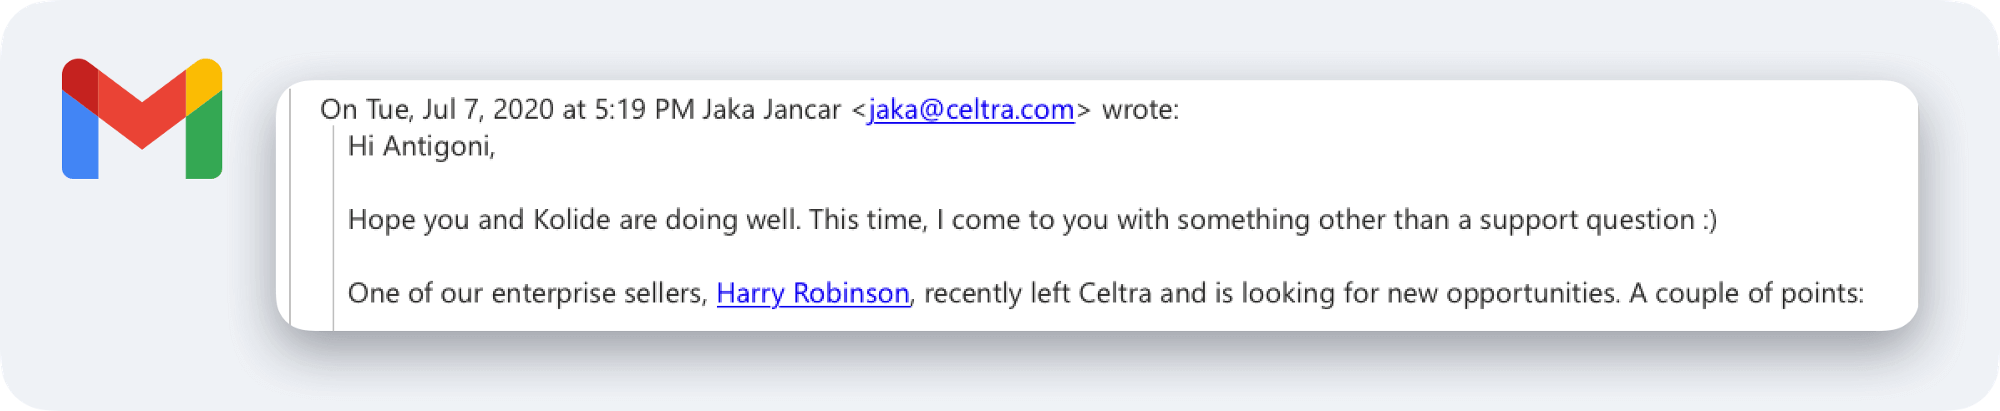 A screenshot of an email sent by Jaka (the CTO of Celtra) to Antigoni Sinanis of Kolide. Jaka's email reads: Hi Antigoni, Hope you and Kolide are doing well. This time, I come to you with something other than a support question :). One of our enterprise sellers, Harry Robinson recently left Celtra and is looking for new opportunities.